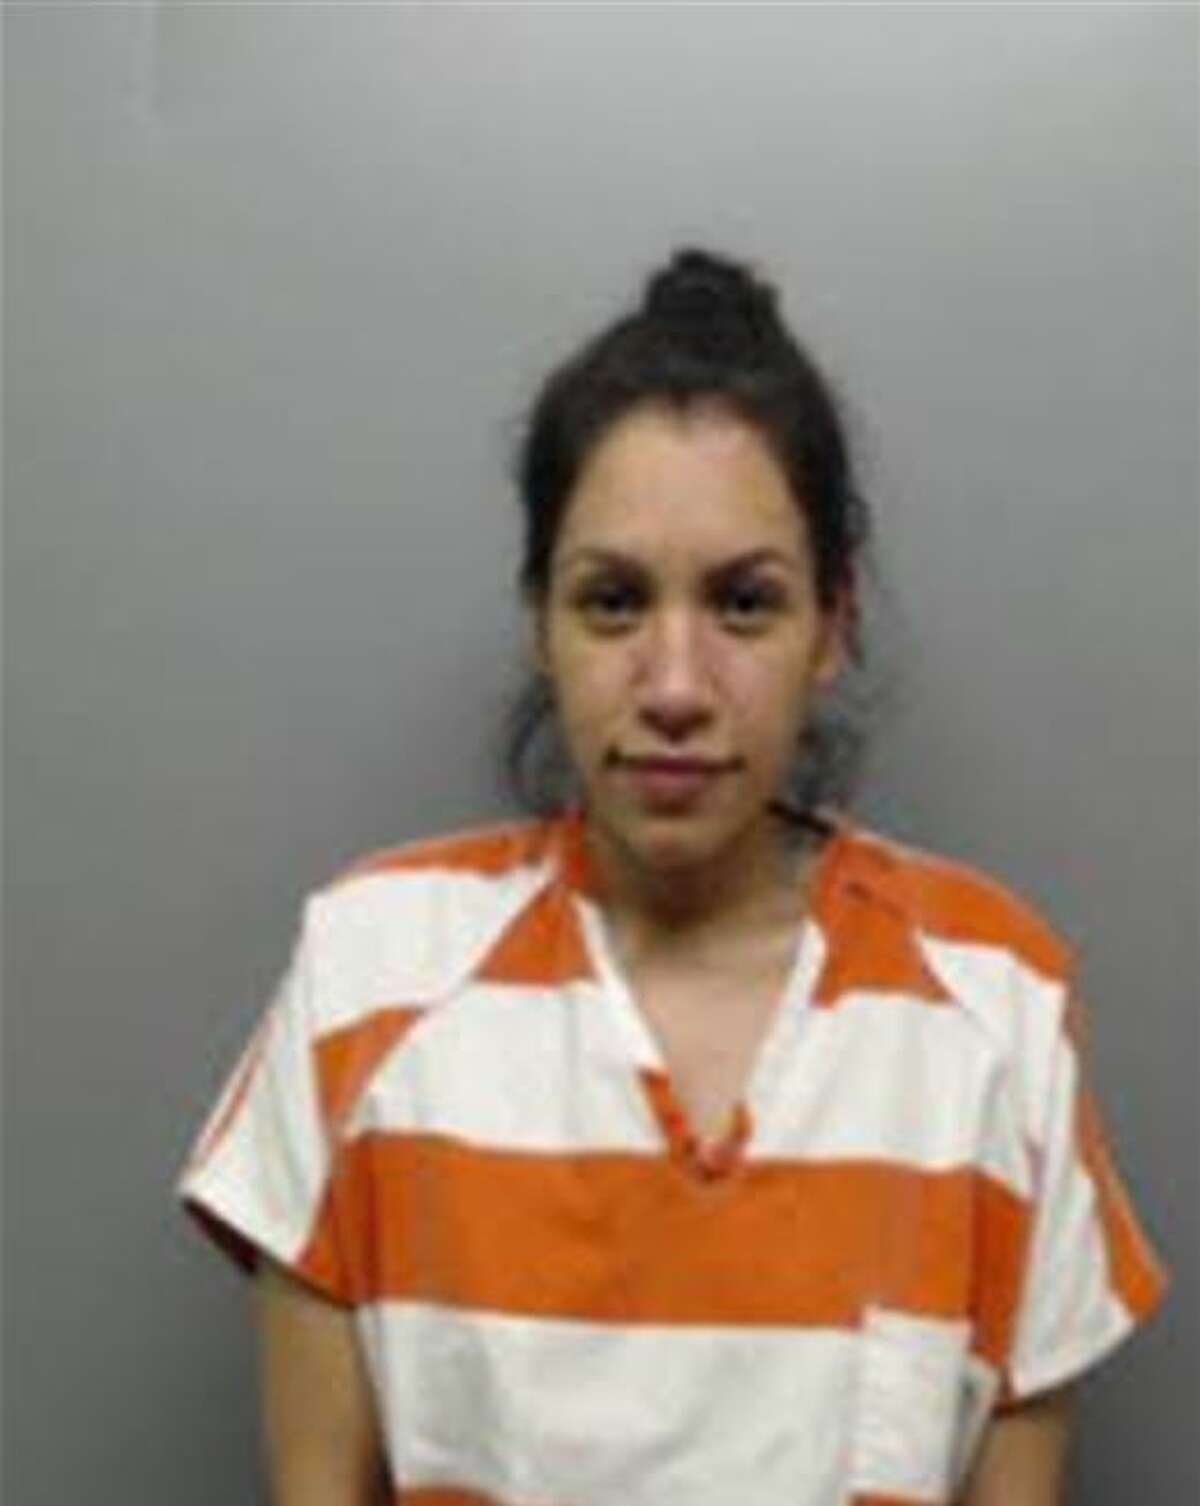 Michelle Garza, 25, was charged with aggravated assault with a firearm, unlawful possession of a firearm by a felon, two counts of possession of a controlled substance, engaging in organized criminal activity and failure to identify a fugitive from justice.